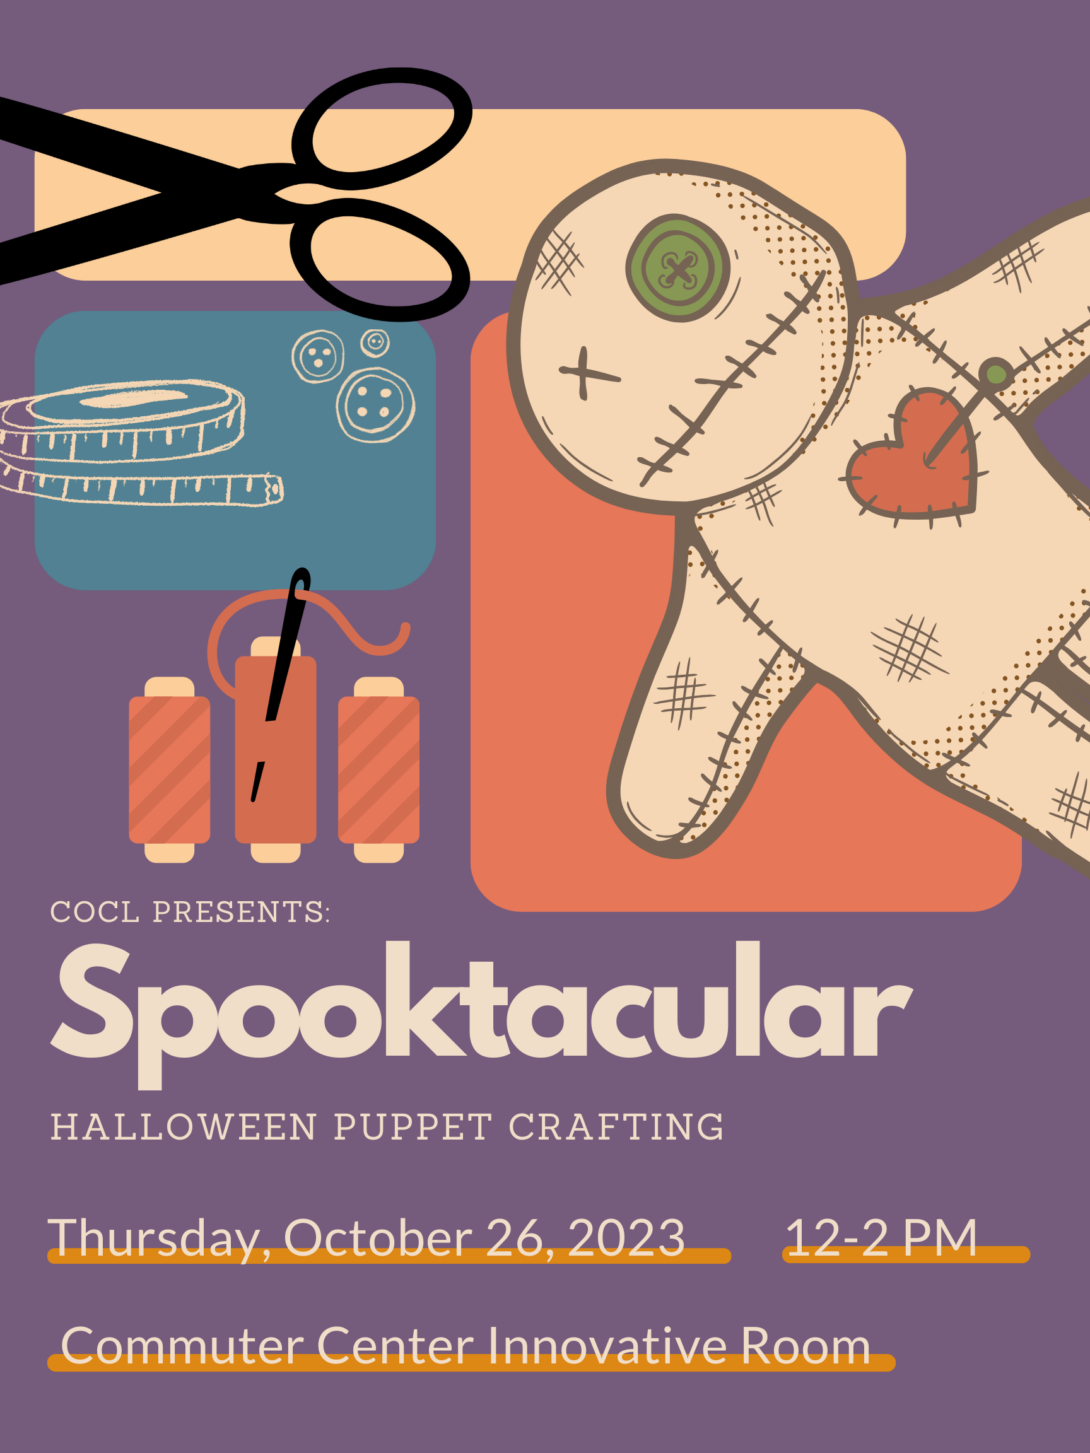 COCL Presents - Spooktacular Halloween Puppet Crafting, Thursday, October 26, 2023 from 12-2 p.m. Commuter Student Resource Center Innovative Room